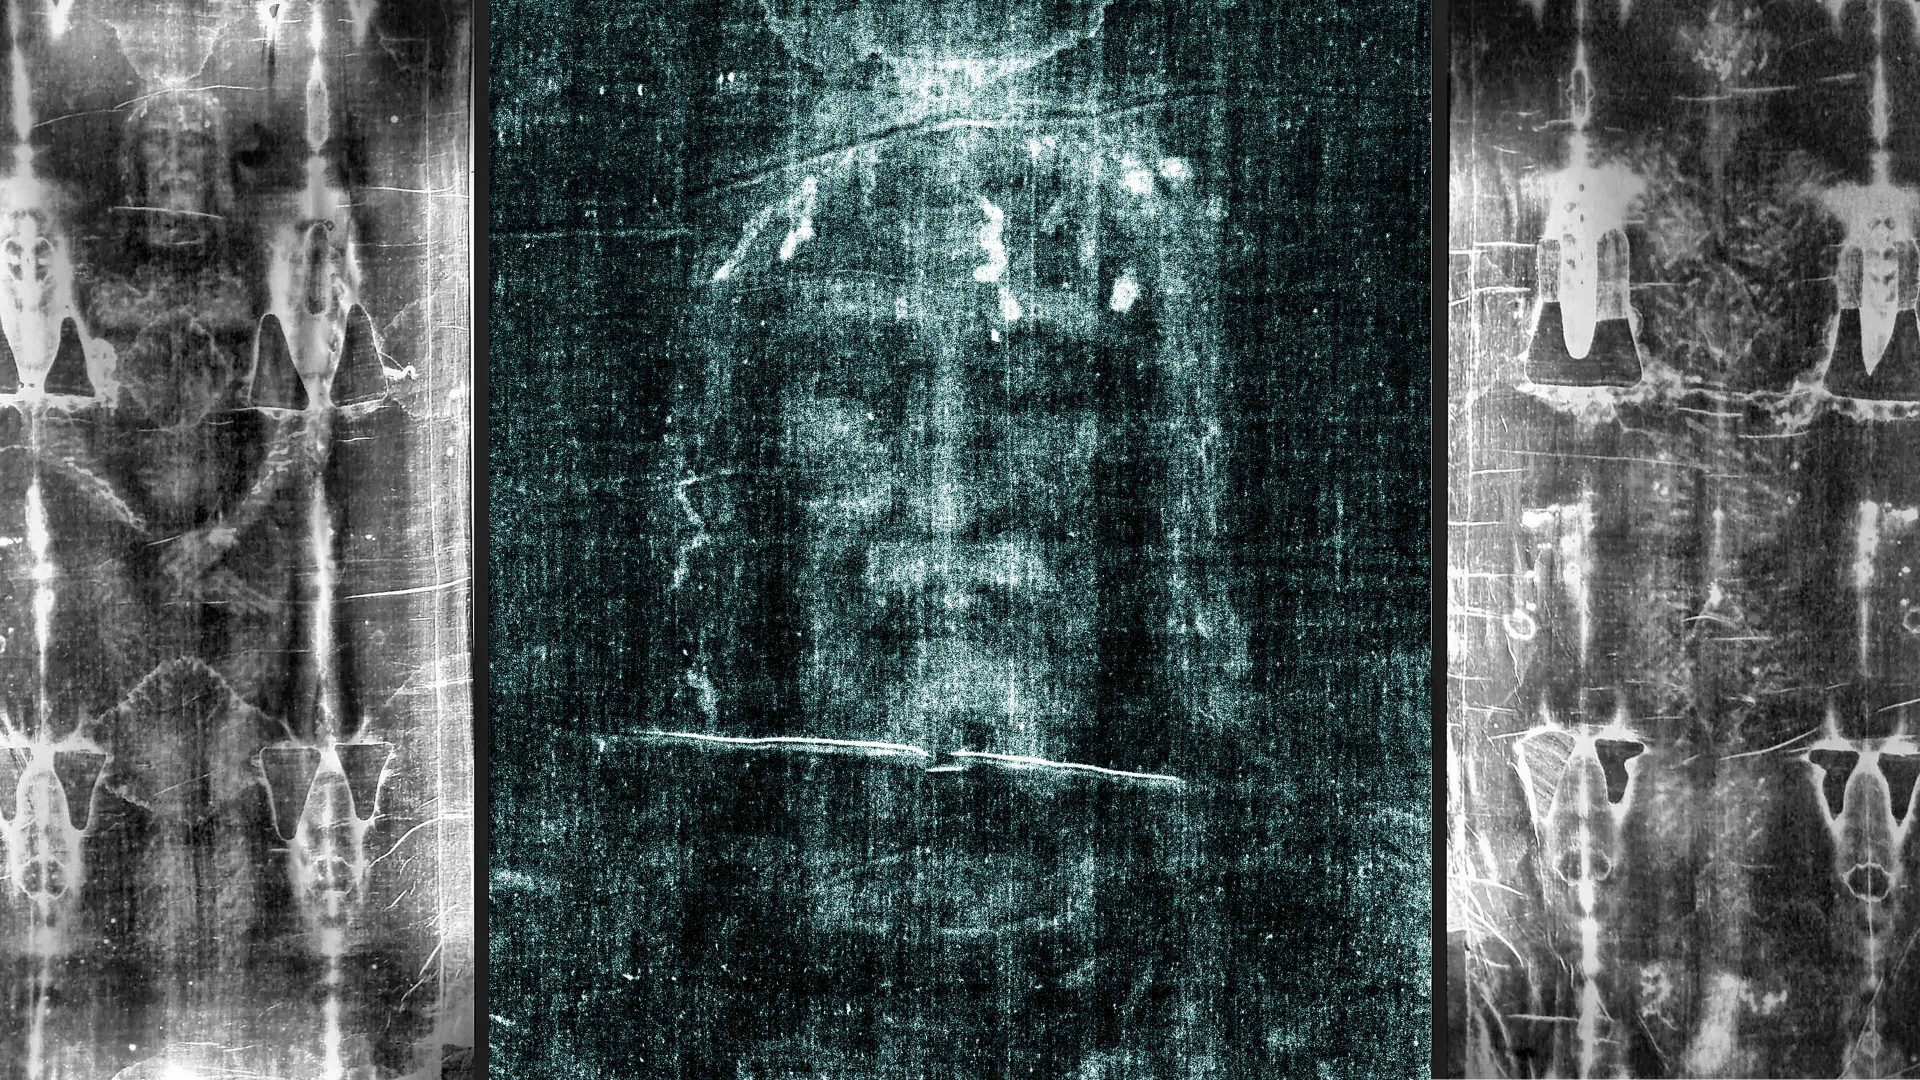 Secondo Pia became the first person to photograph the Turin Shroud, in 1898, sparking a global obsession. Photo: Universal History Archive/Getty